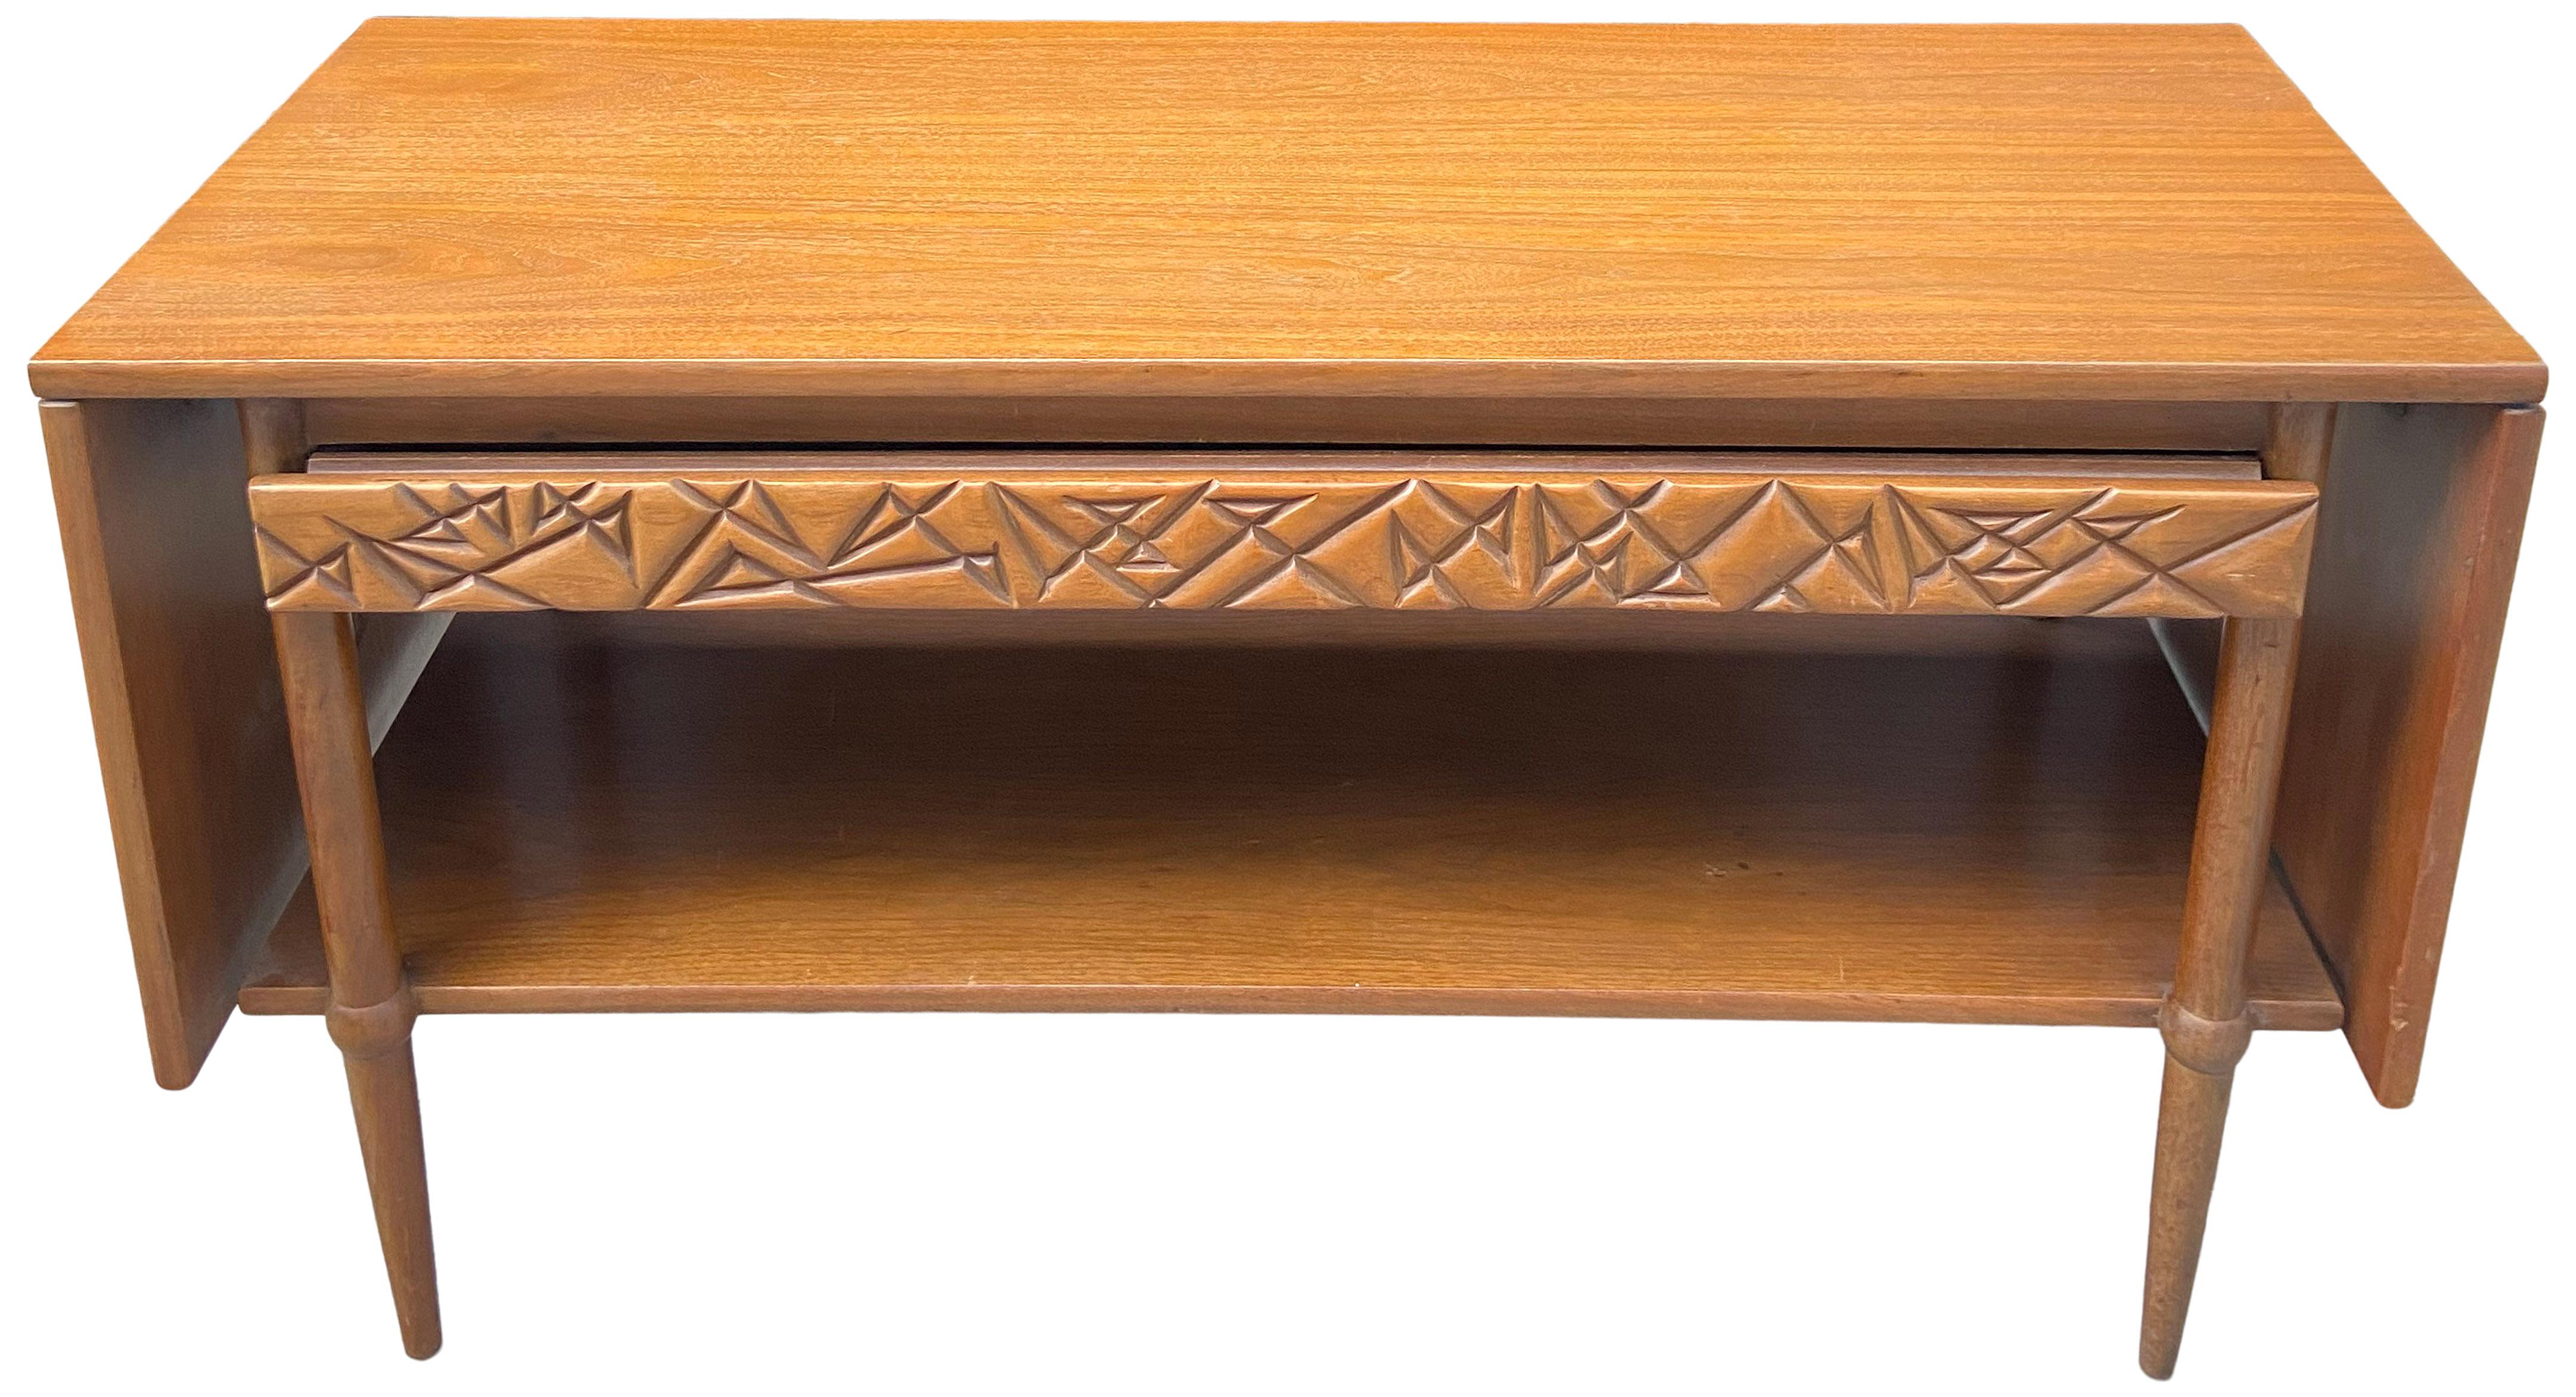 Stylish and functional drop leaf server or console by Henredon. This is piece has the same style as Frank Lloyd Wright's Henredon line. Nicely made and practical piece with beautiful sculpted (almost brutalist) drawer front details. Made from